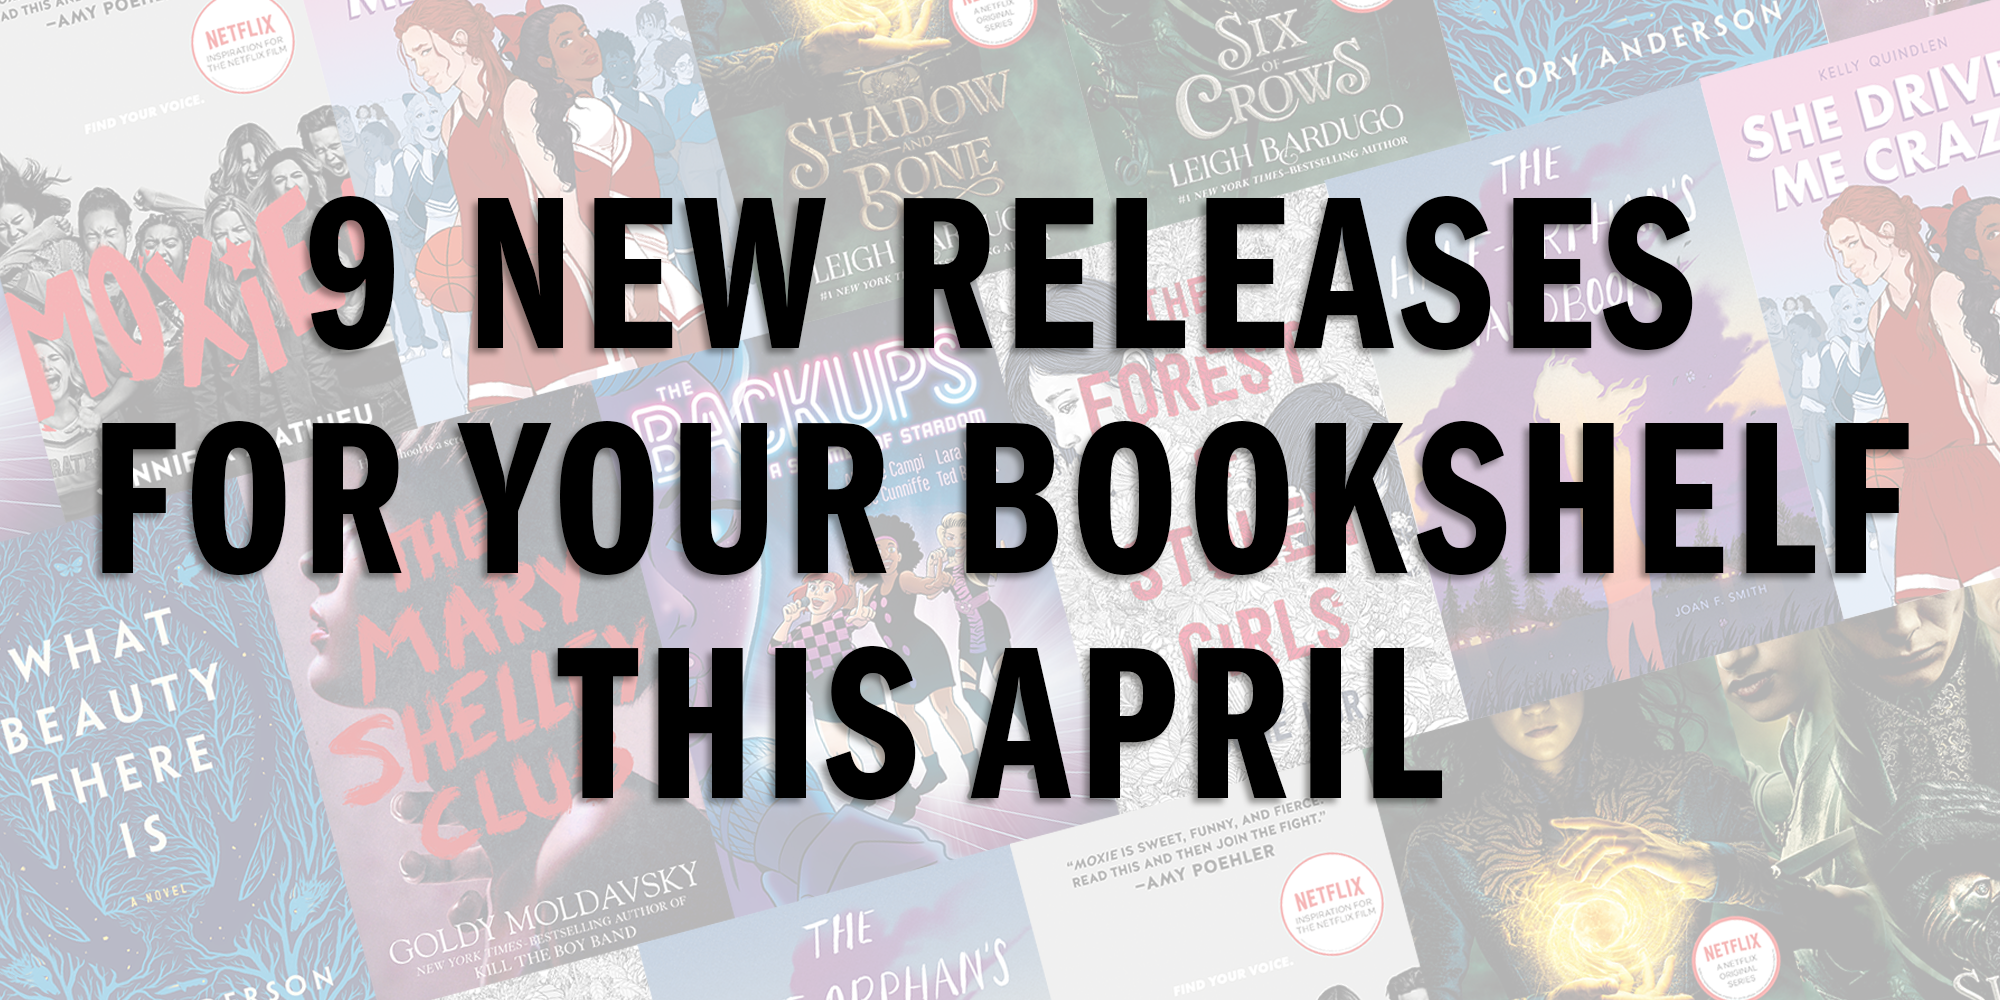 9 New Releases For Your Bookshelf This April